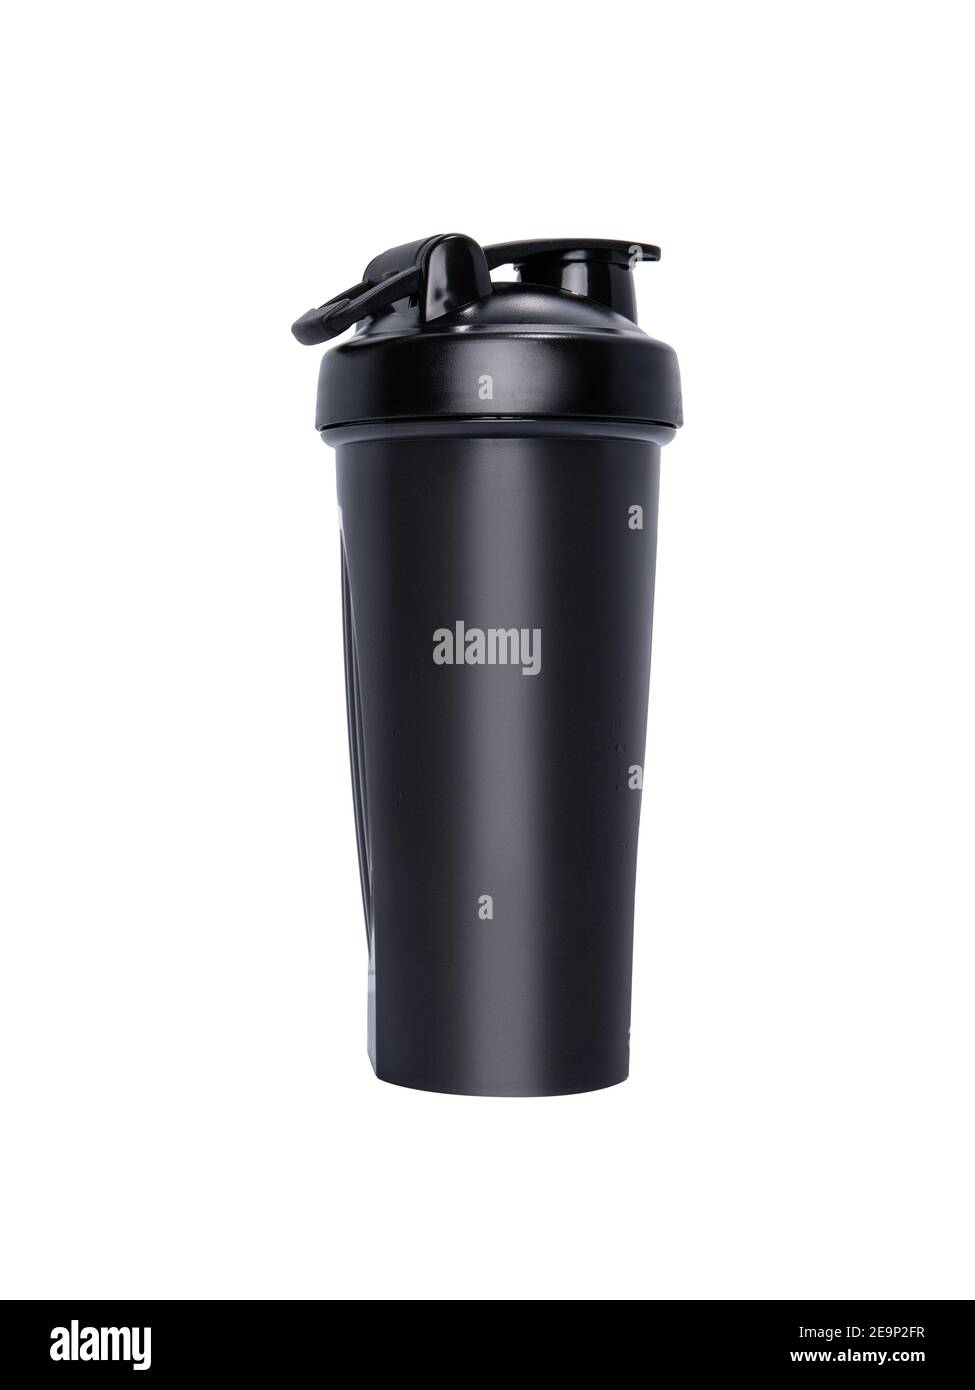 Reusable mug and tumbler. Black color sport flask isolated on a white background. Stock Photo